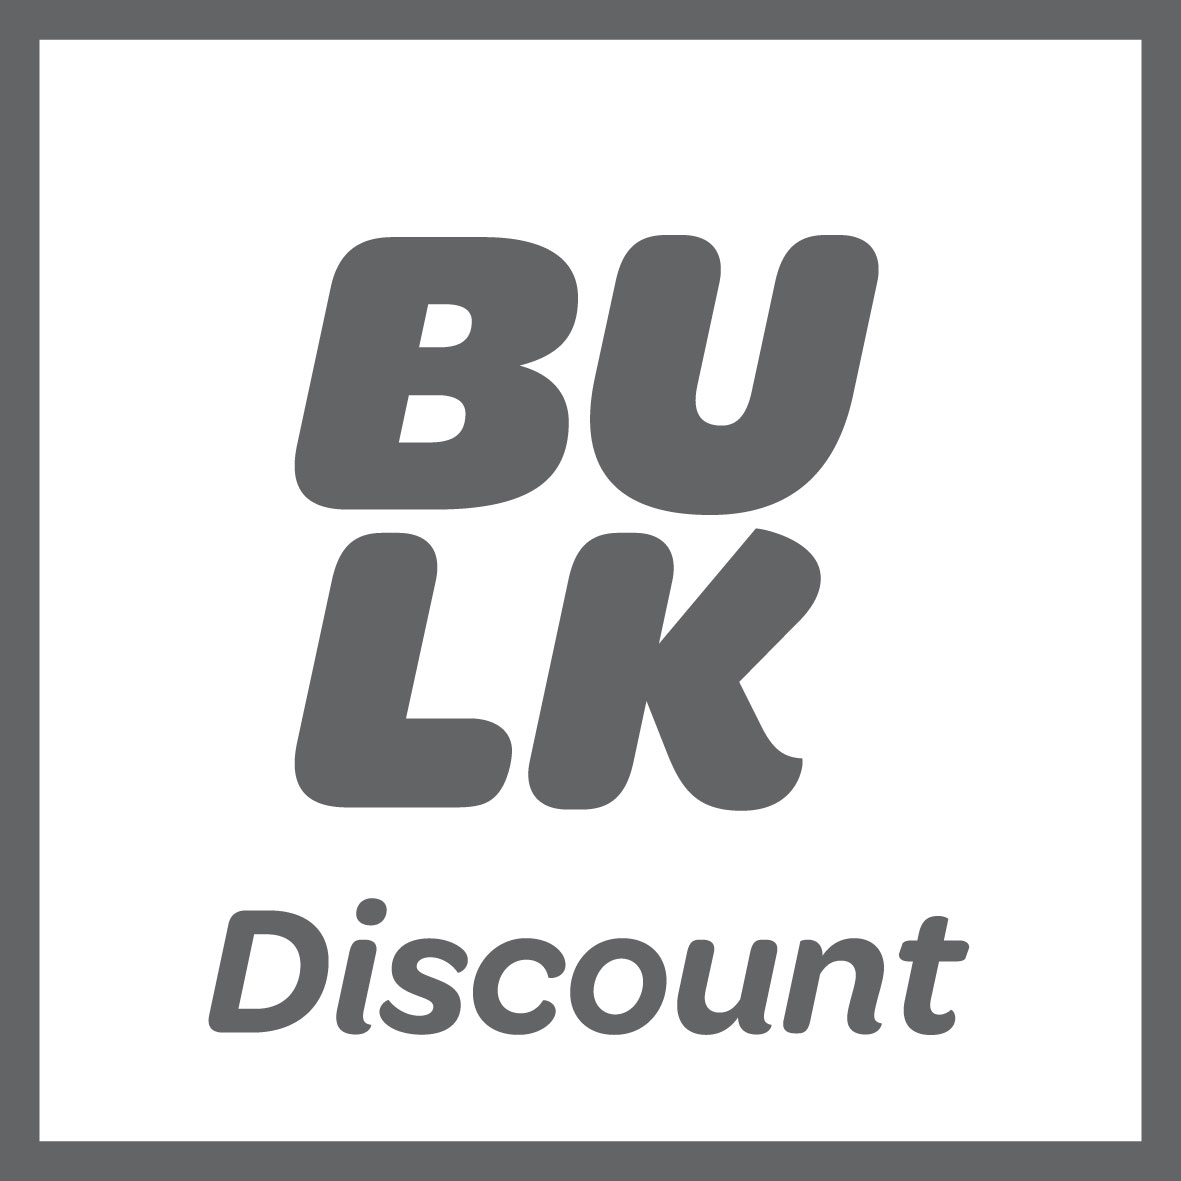 A bulk discount is available